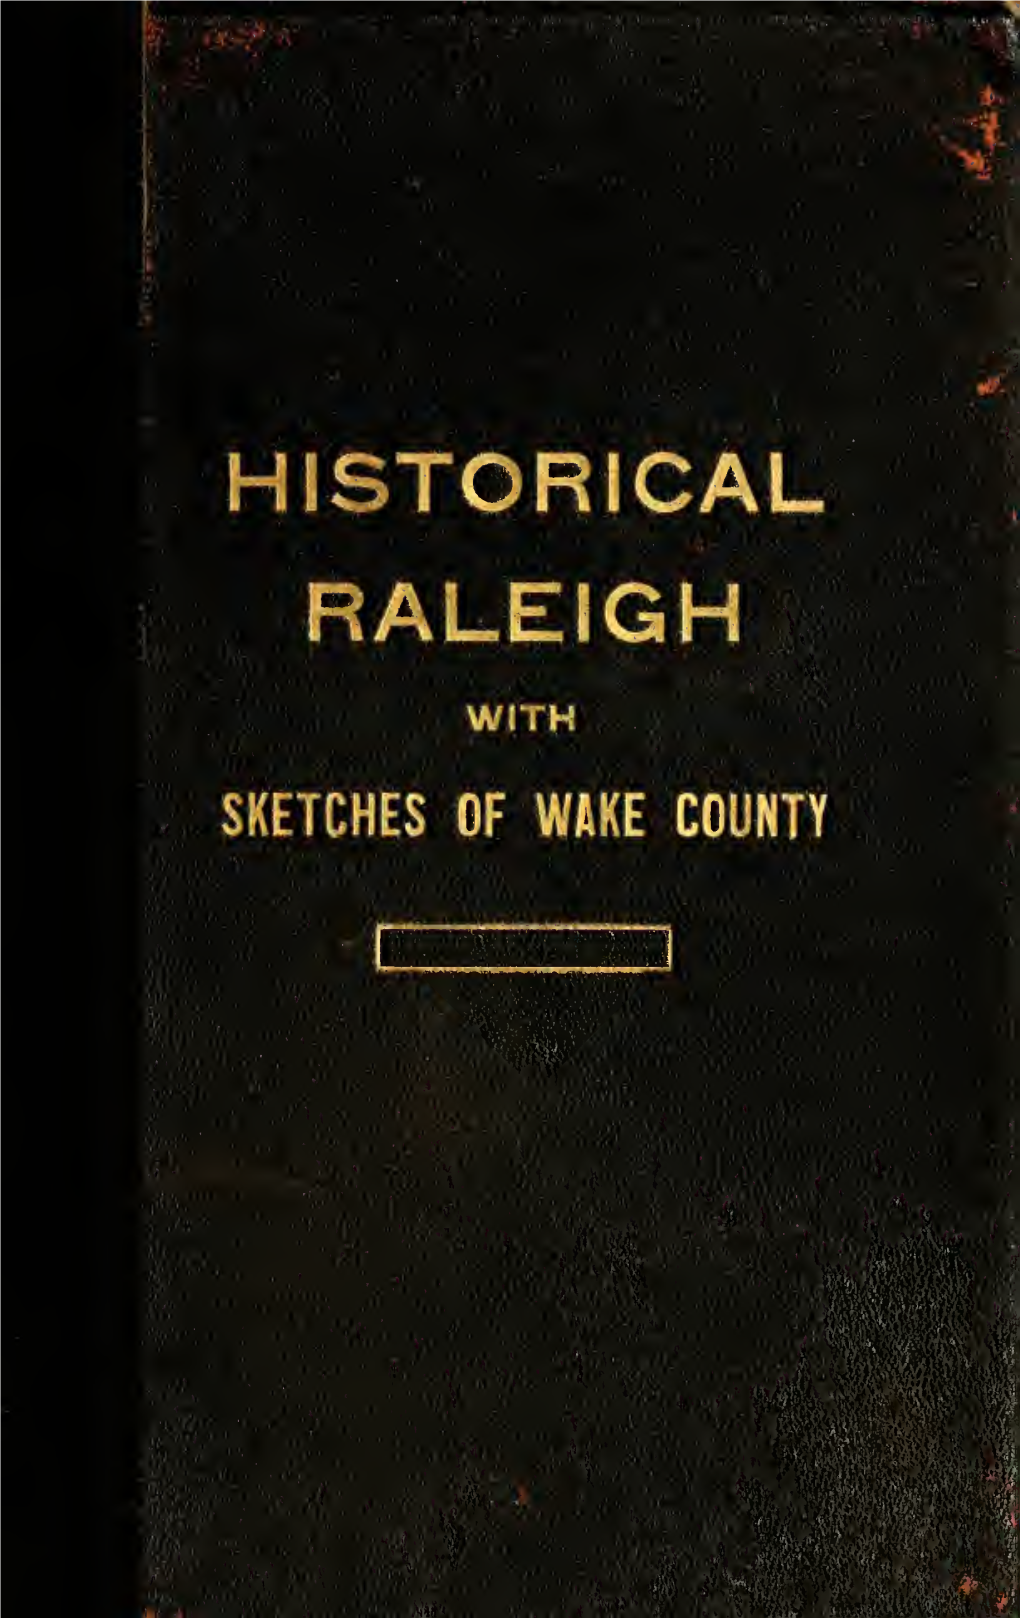 Historical Raleigh. with Sketches of Wake County (From 1771)